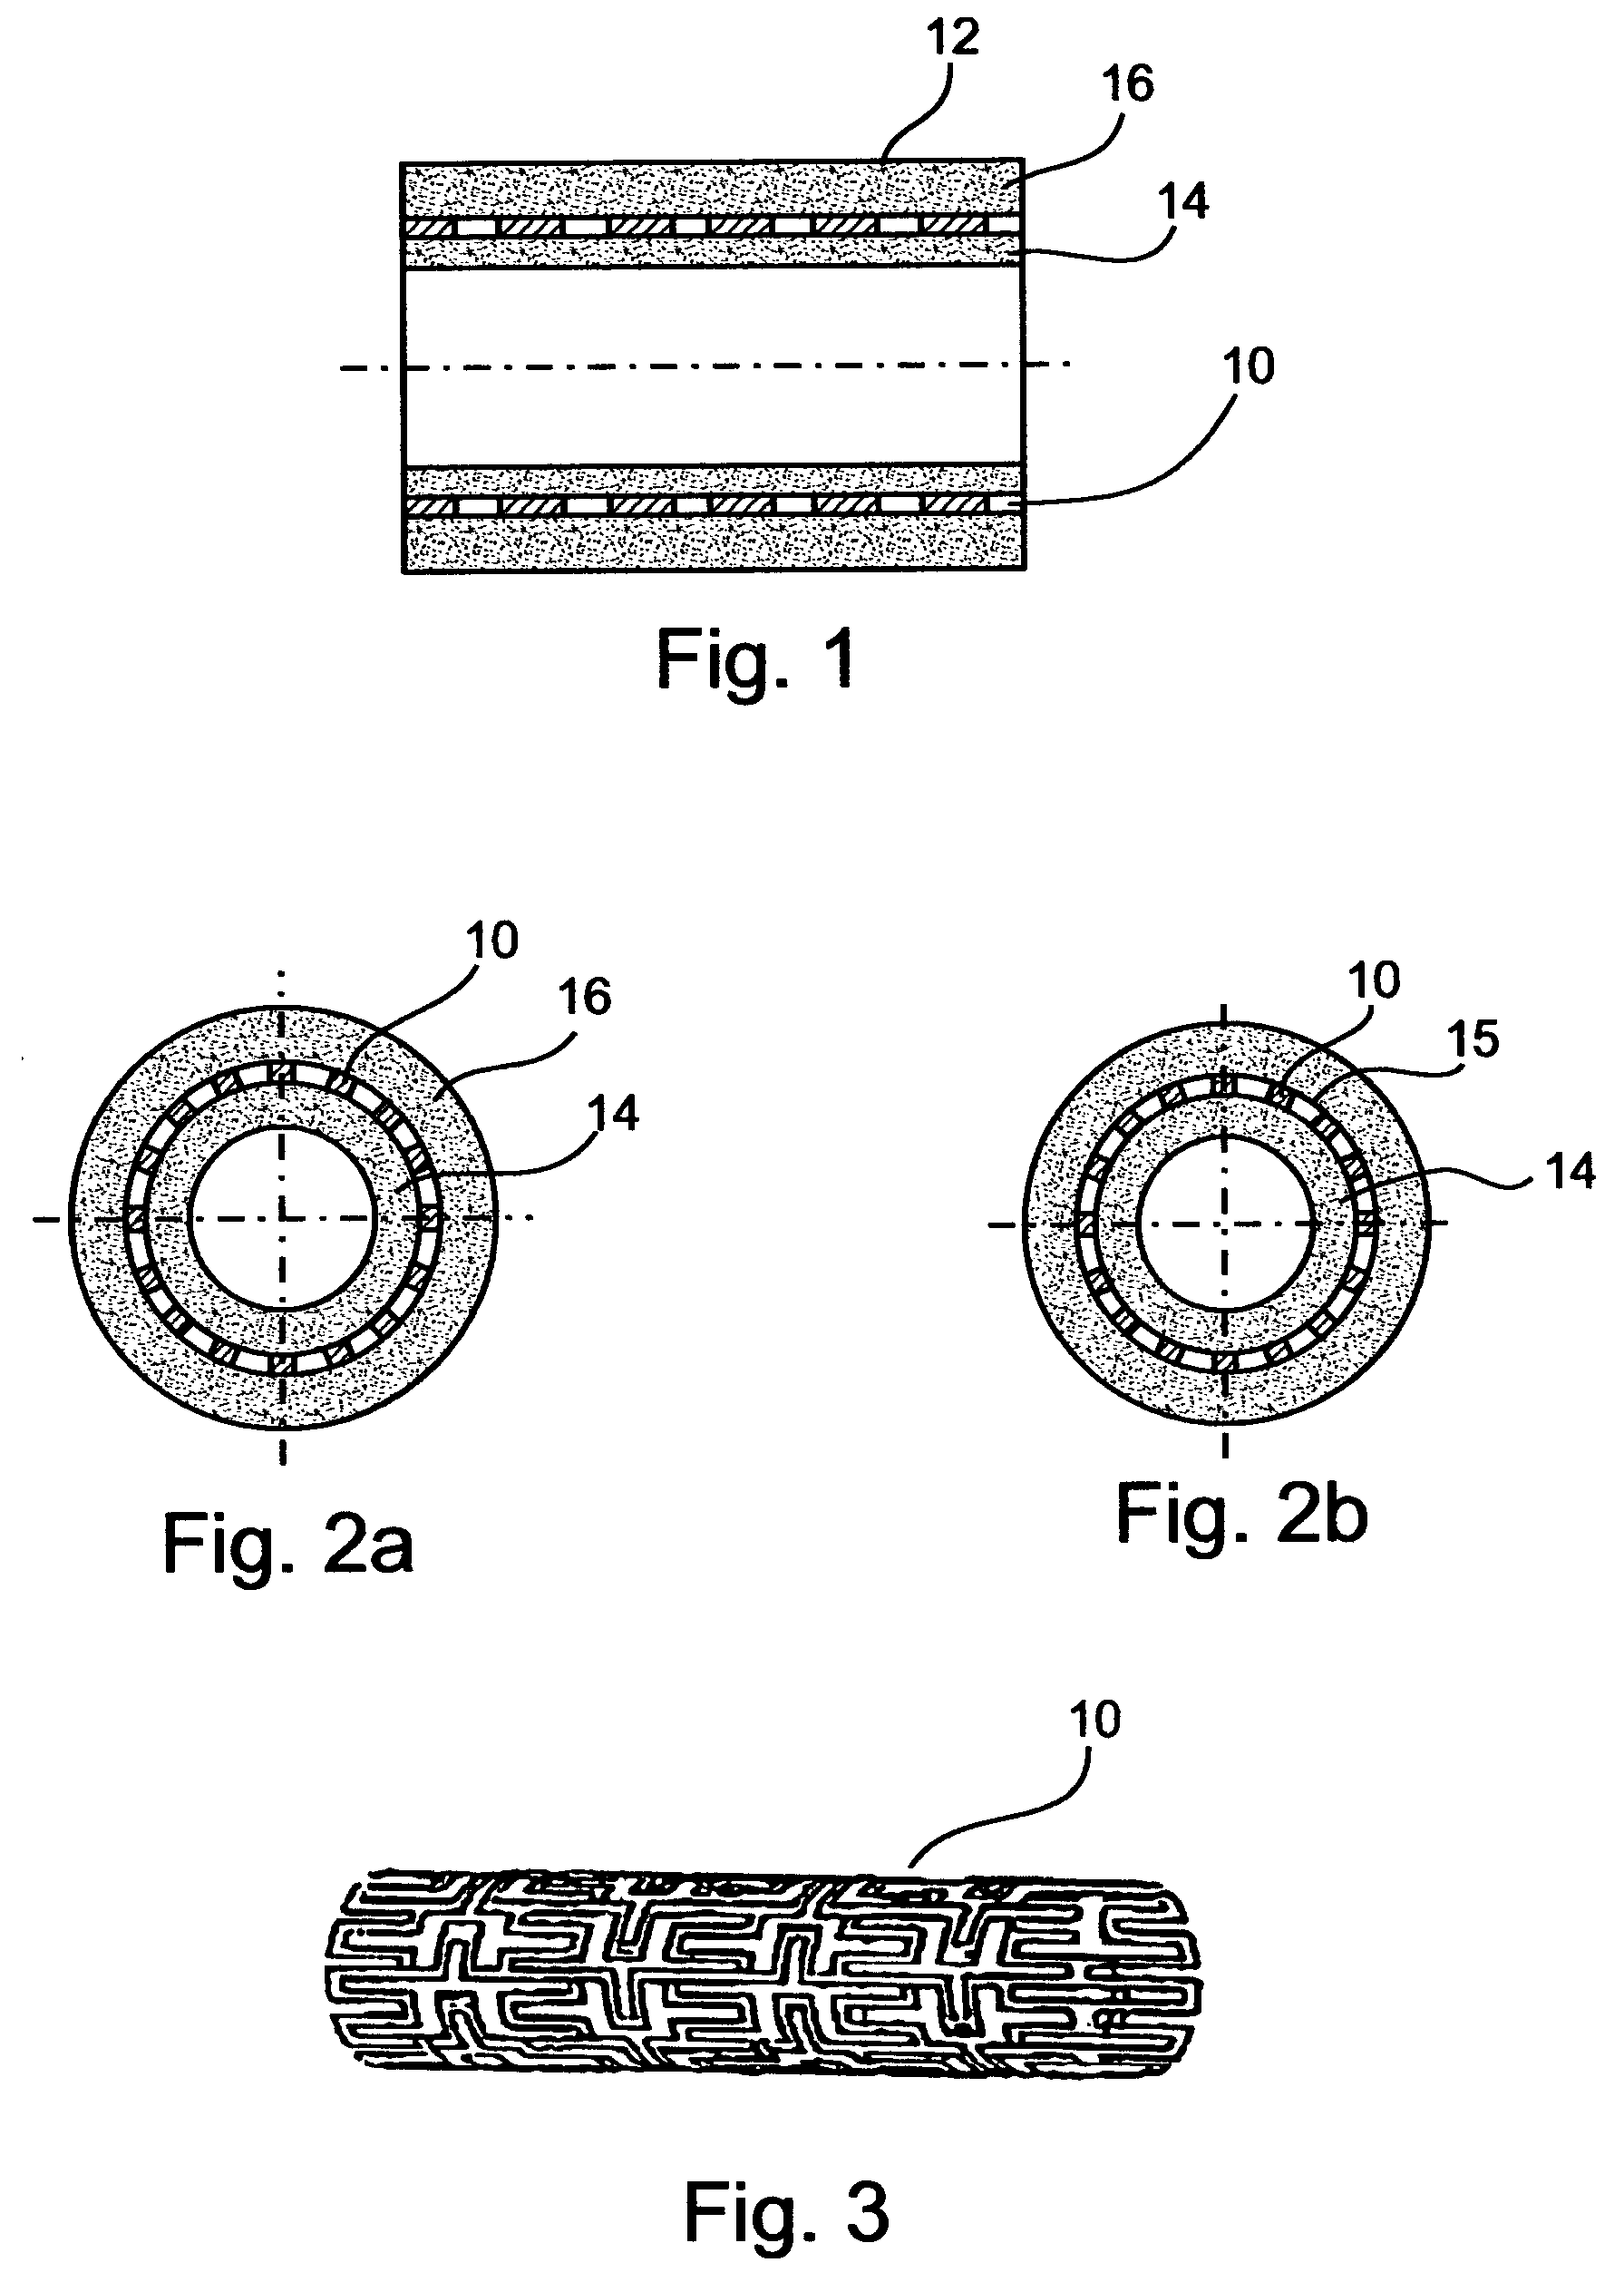 Medicated polymer-coated stent assembly